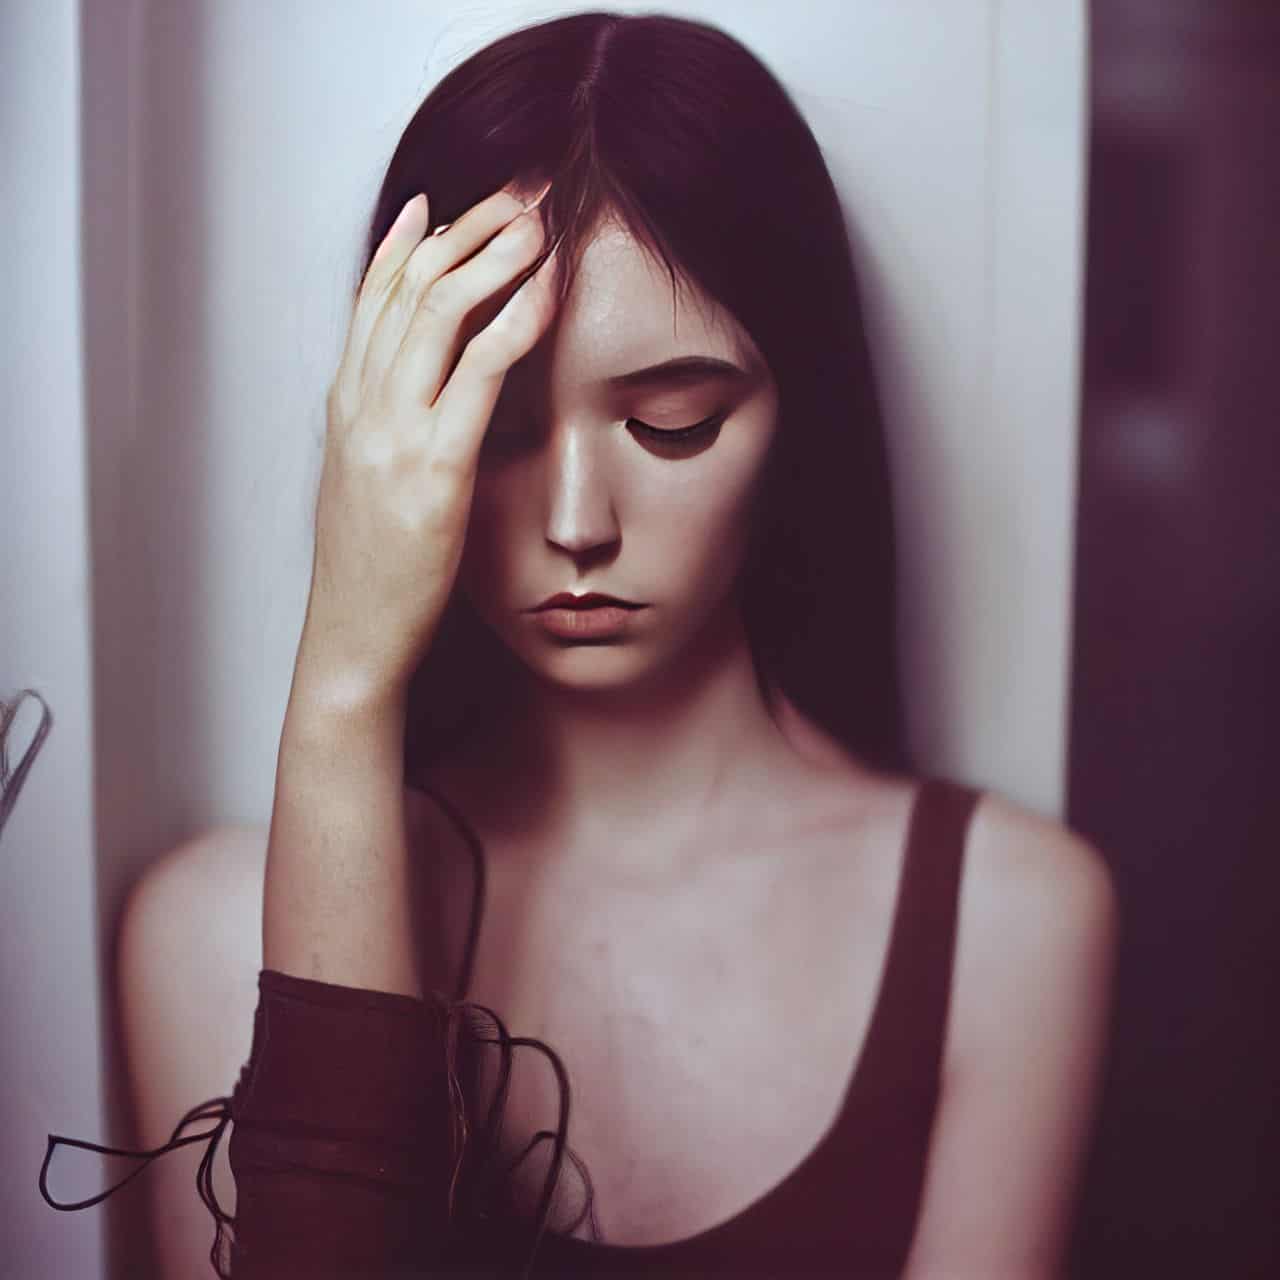 depressed young woman 2